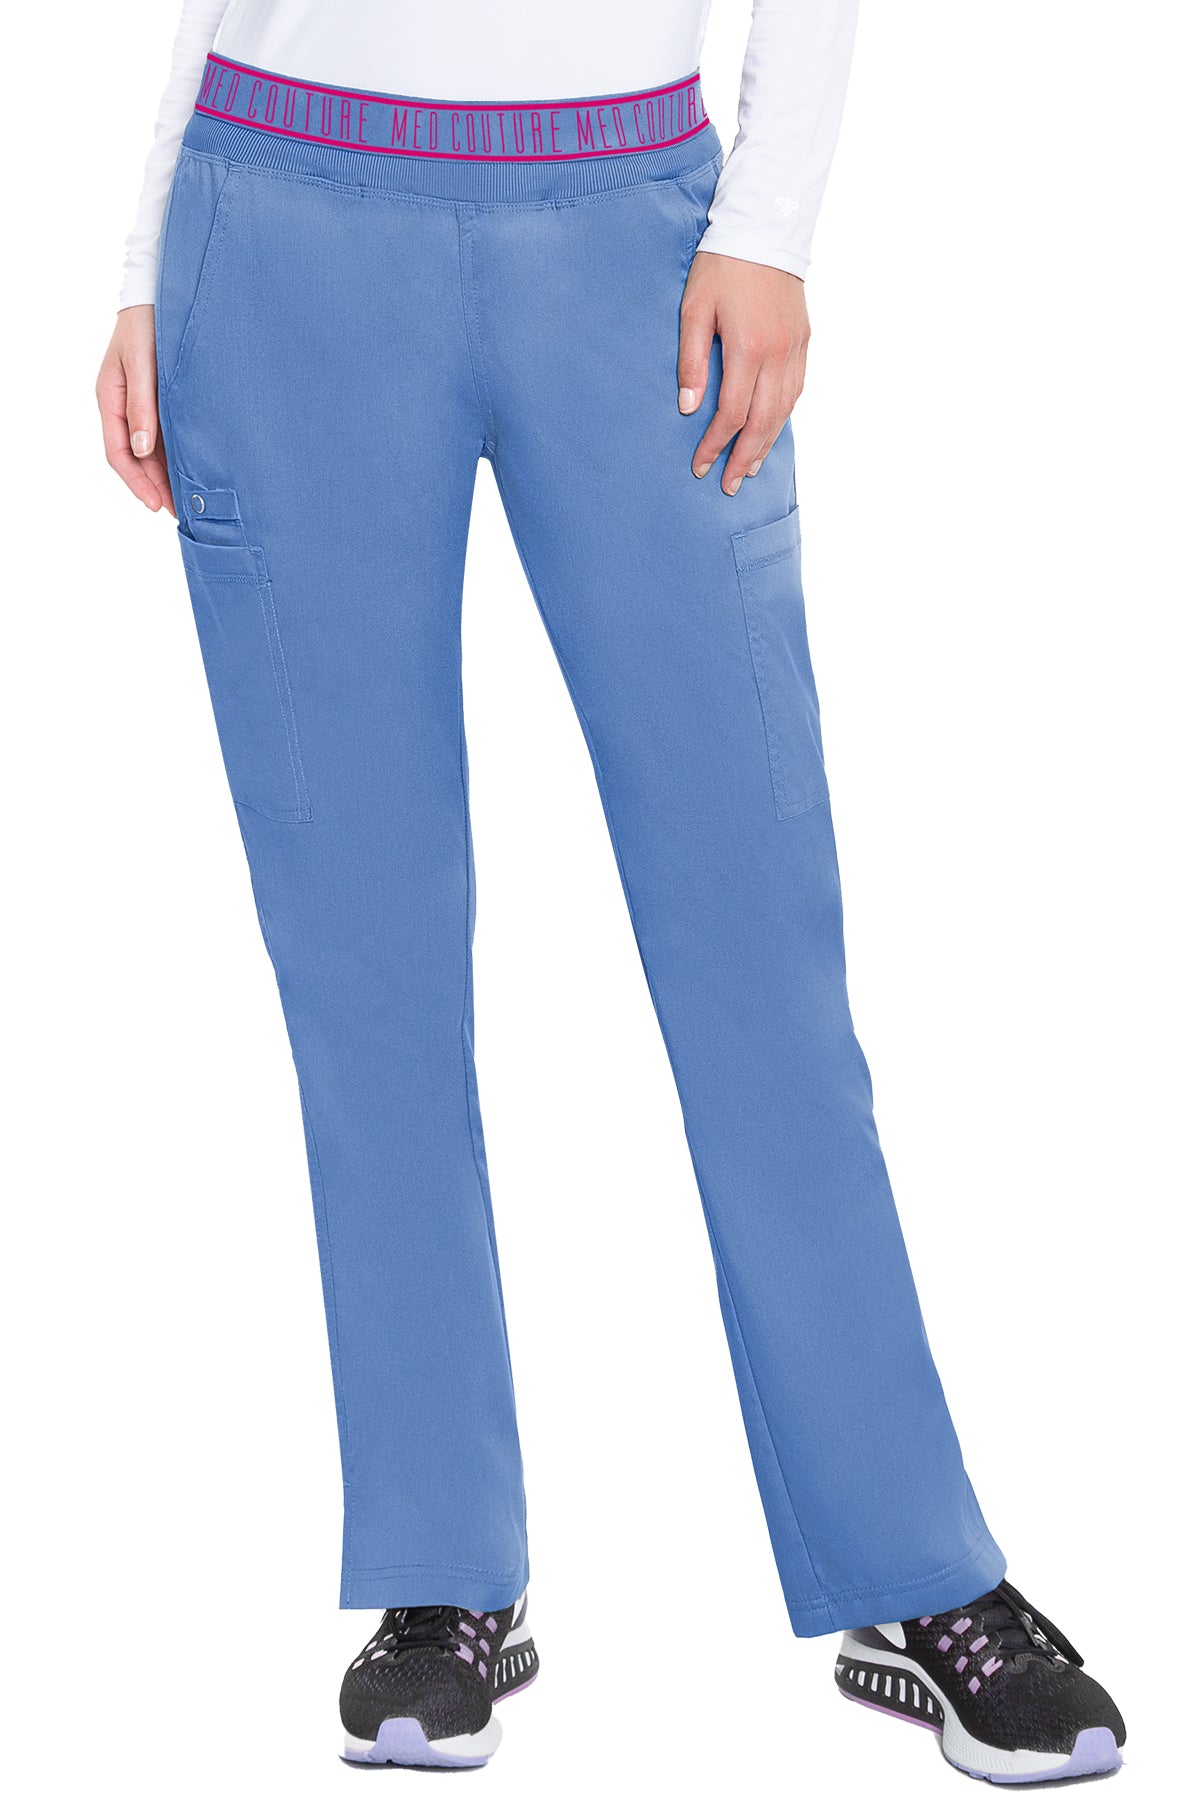 Yoga 2 Cargo Pocket Pant by Med Couture (Regular) XS-5XL/ Ceil